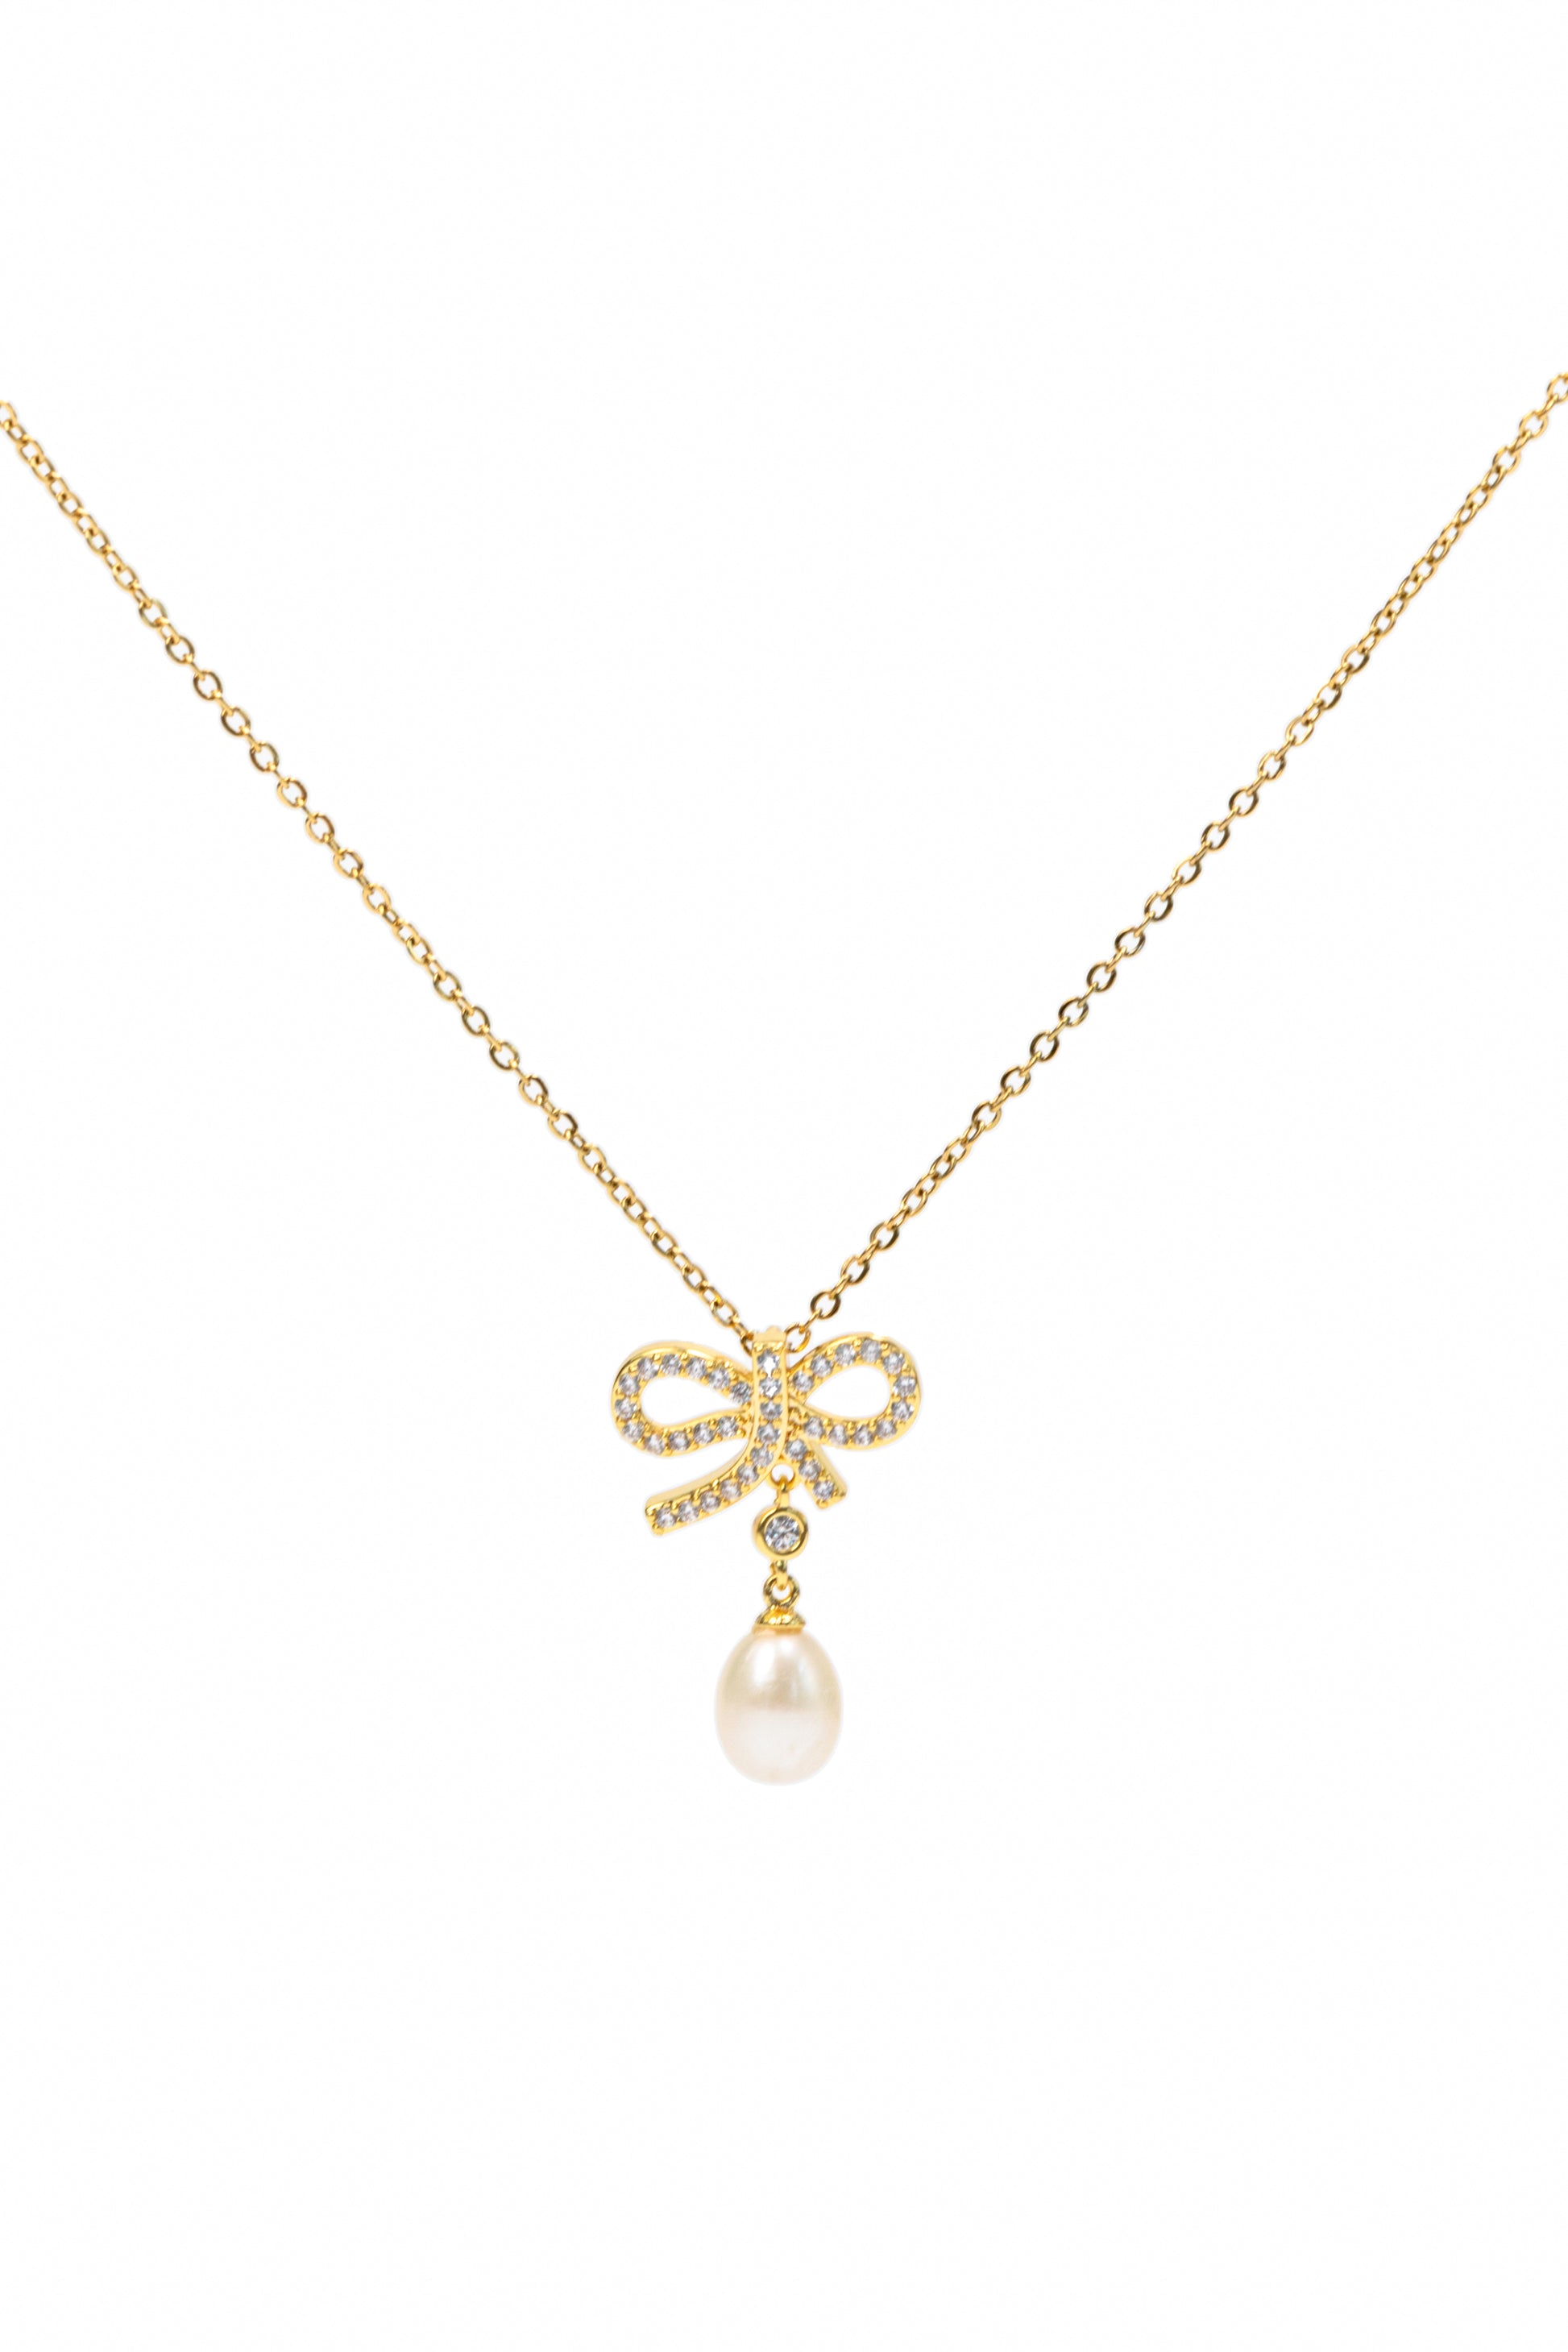 18K Gold Bow Necklace with Freshwater Pearl for Women